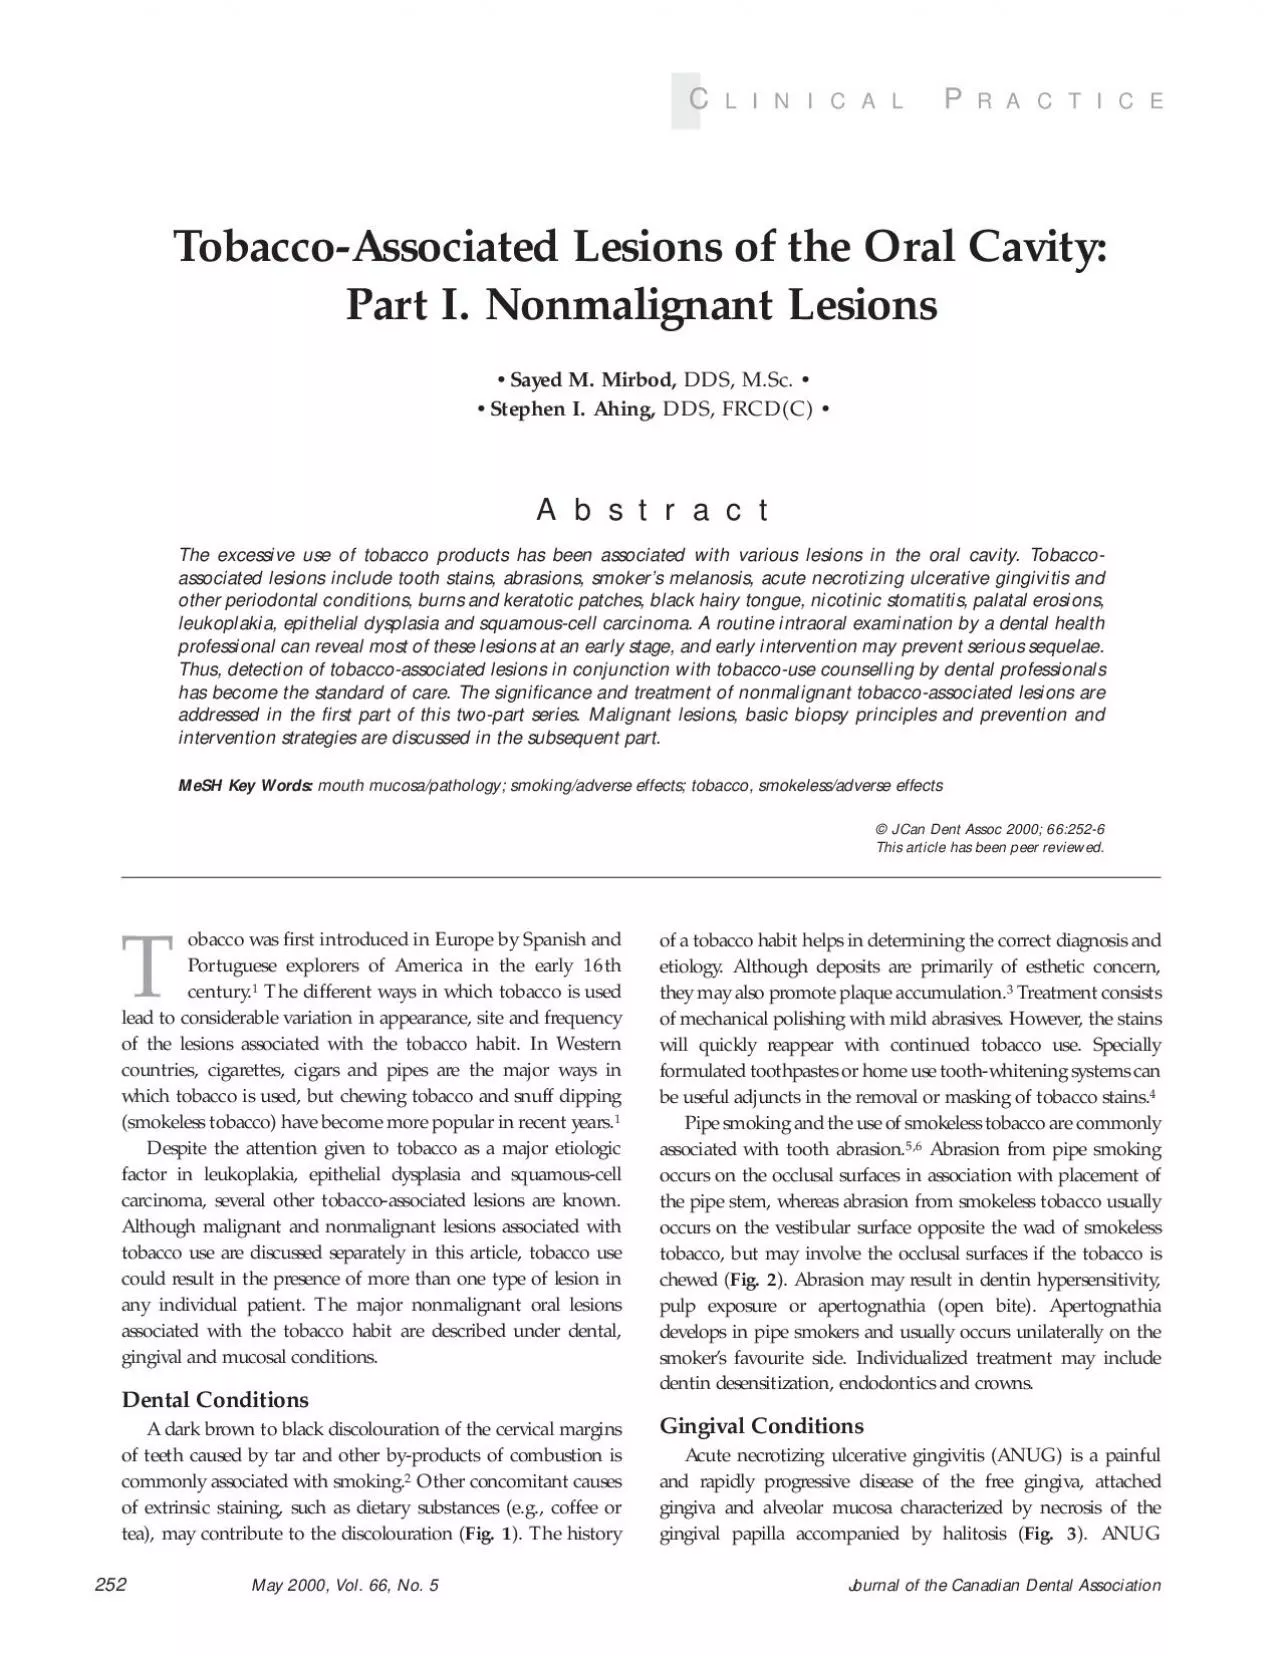 Journal of the Canadian Dental AssociationMay 2000 Vol 66 No 5obac